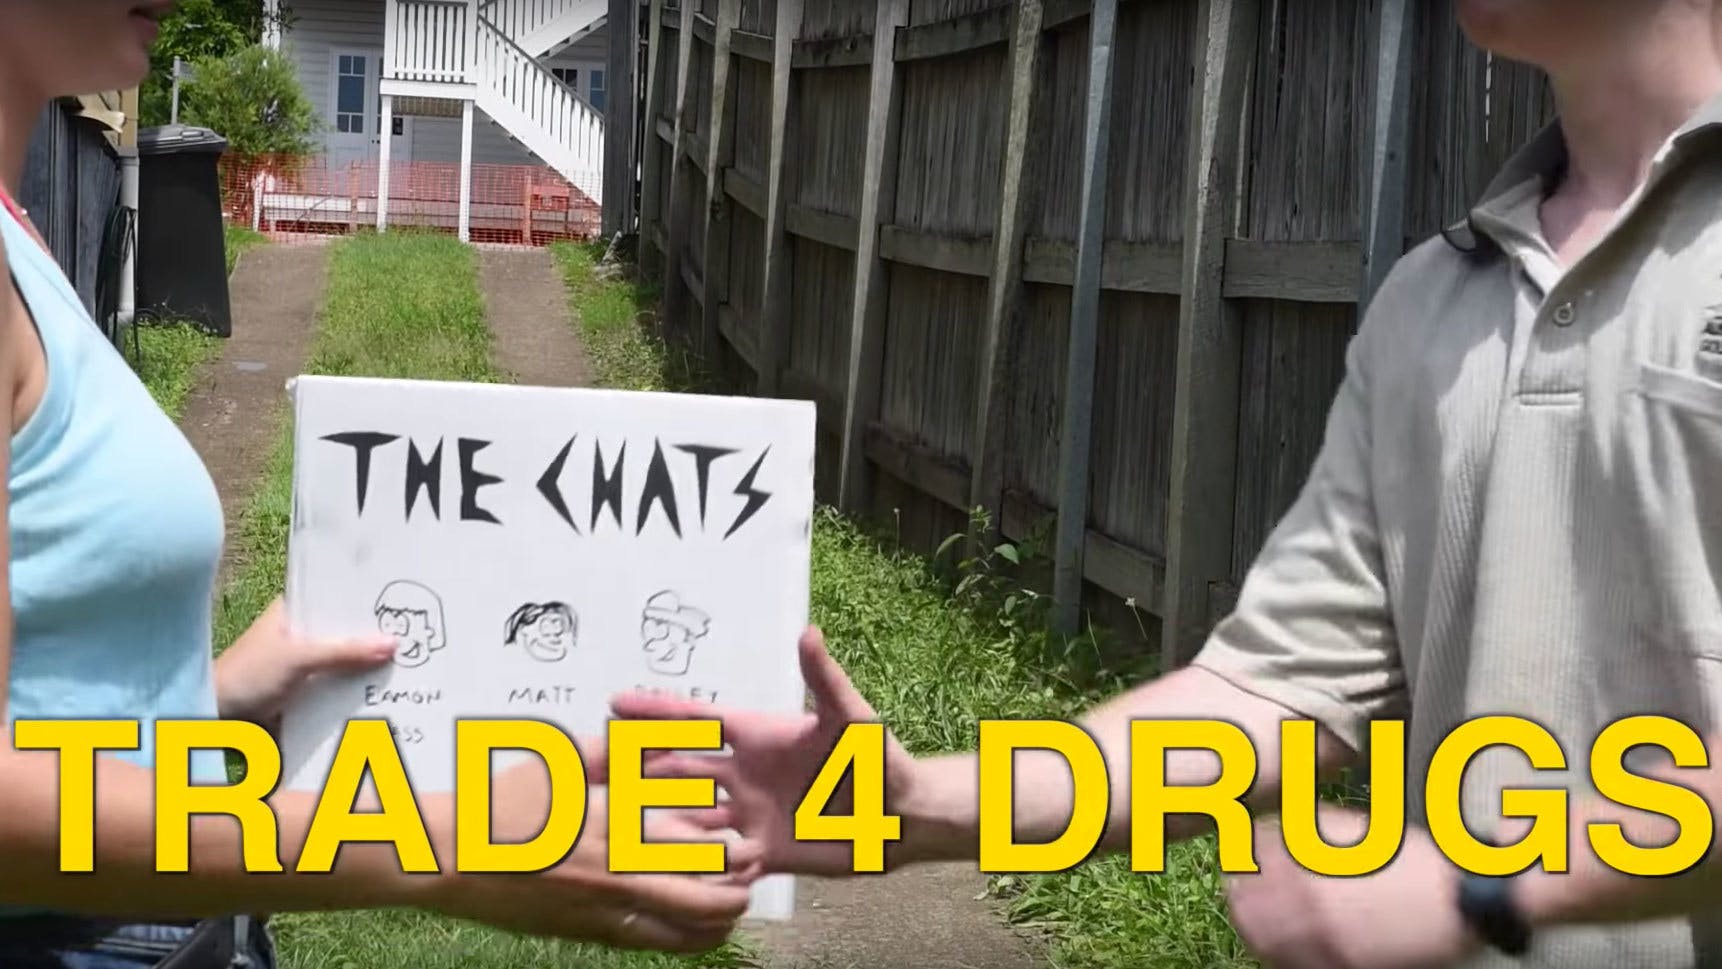 The Chats Want You To Swap Their Album For Drugs In Hilarious Infomercial